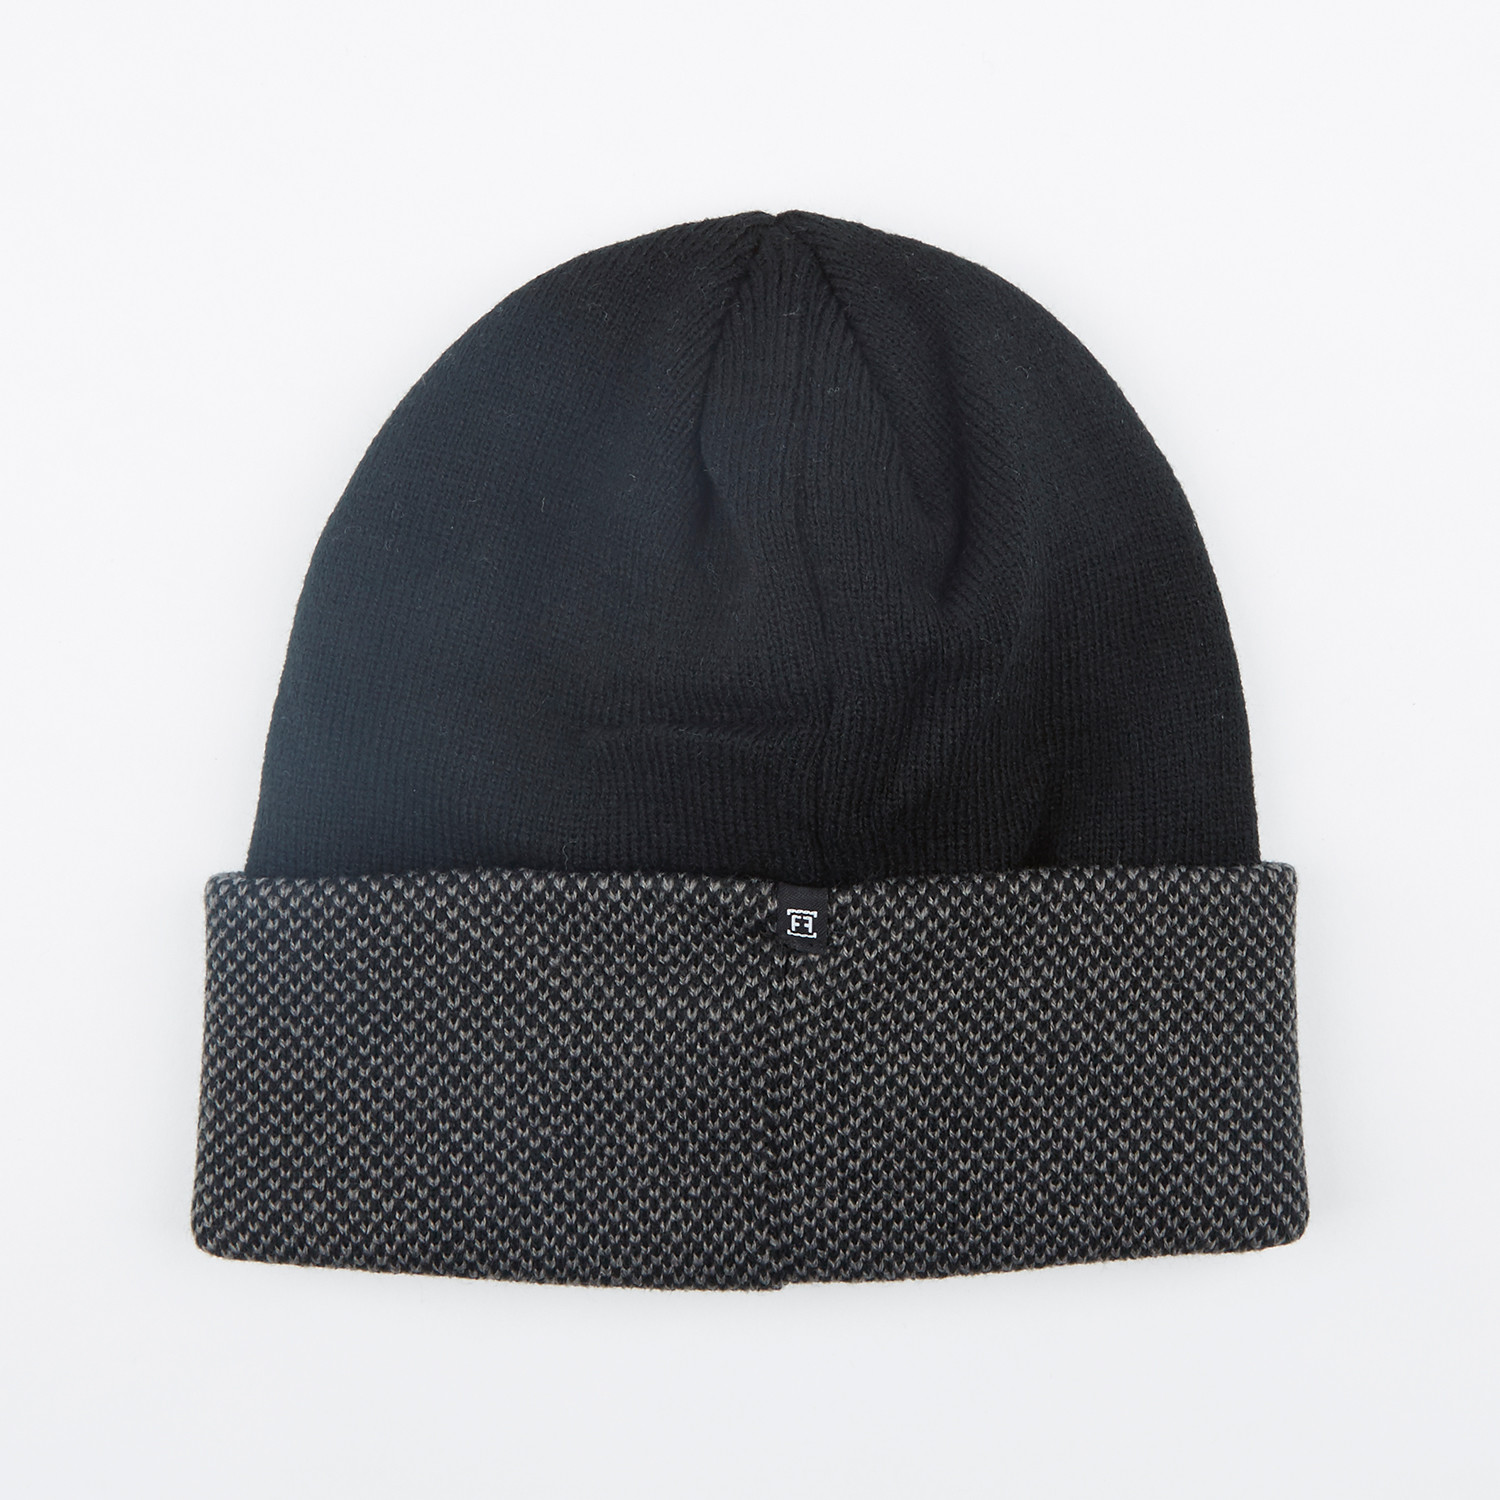 Textured Cuffed Beanie // Black + Charcoal - FITS - Touch of Modern